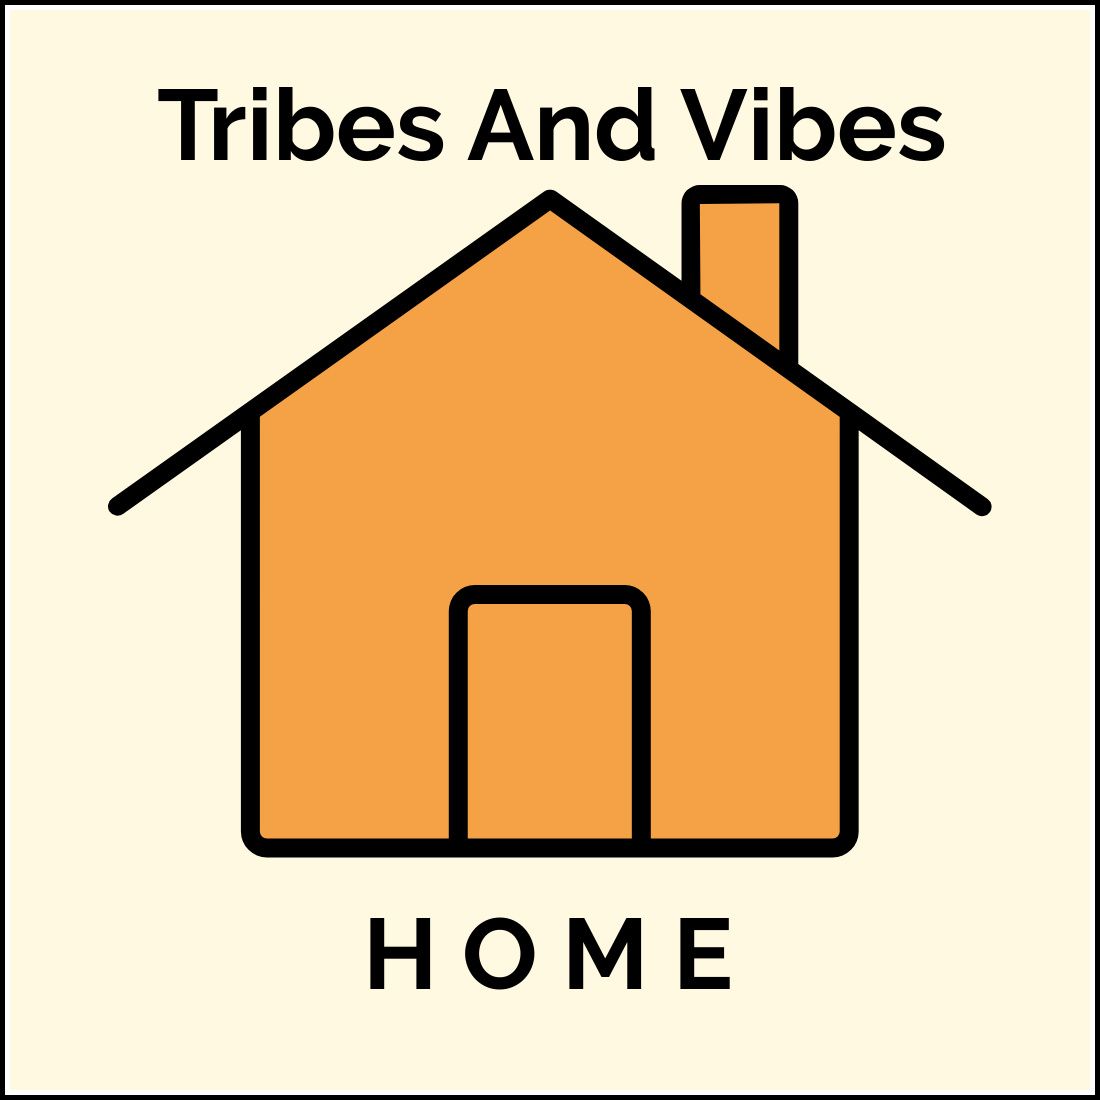 Tribes And Vibes home page